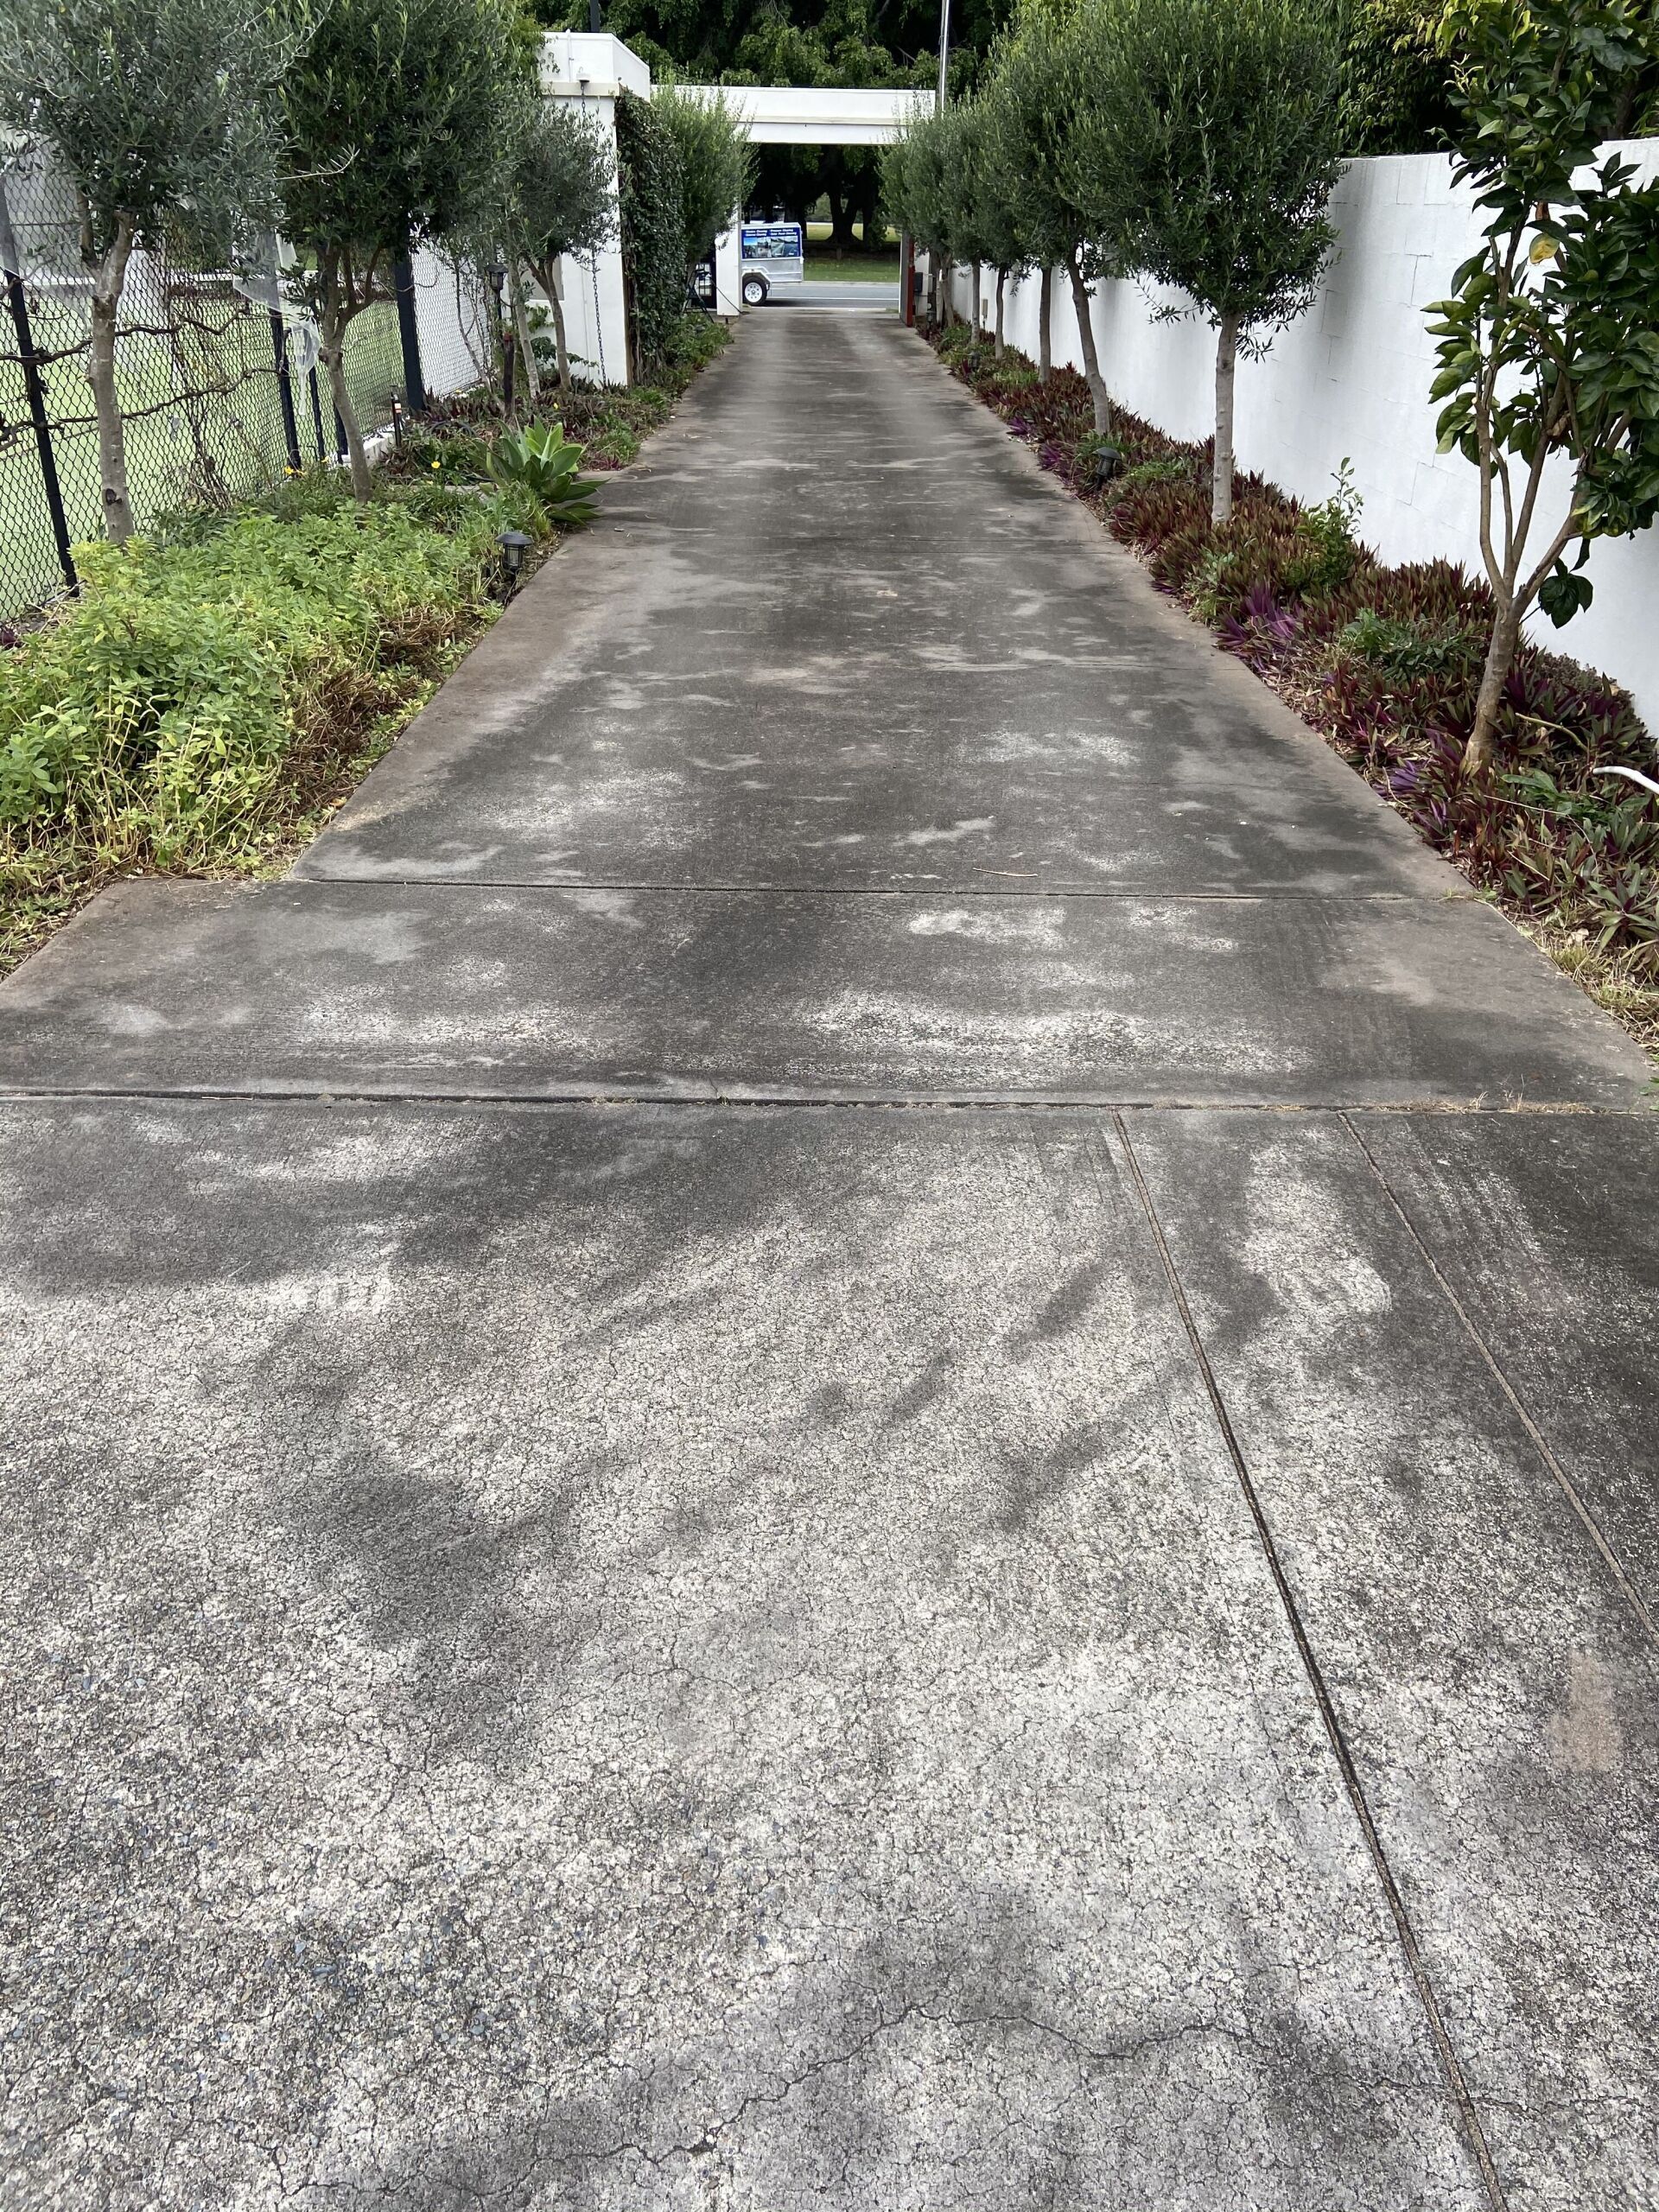 an image of a dirty driveway